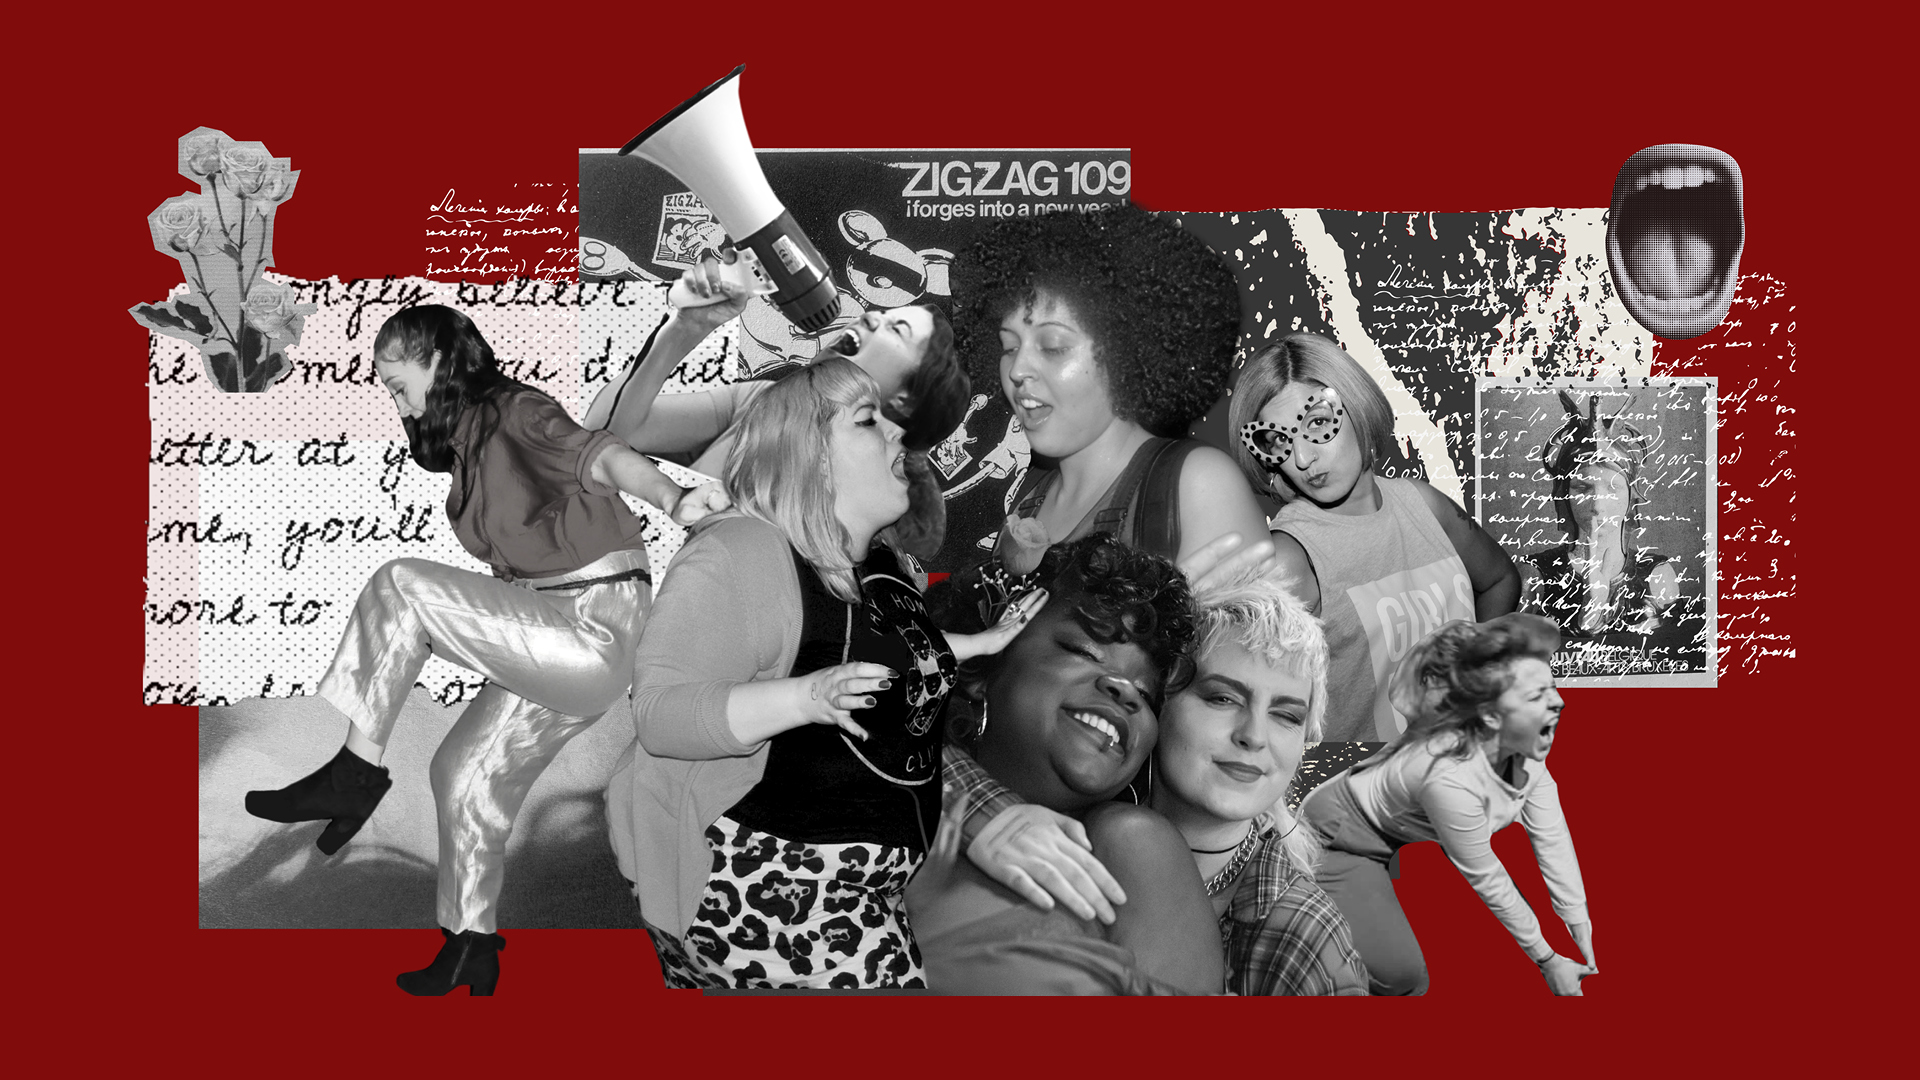 A collage of black and white photos of Girl Gang members on a red background